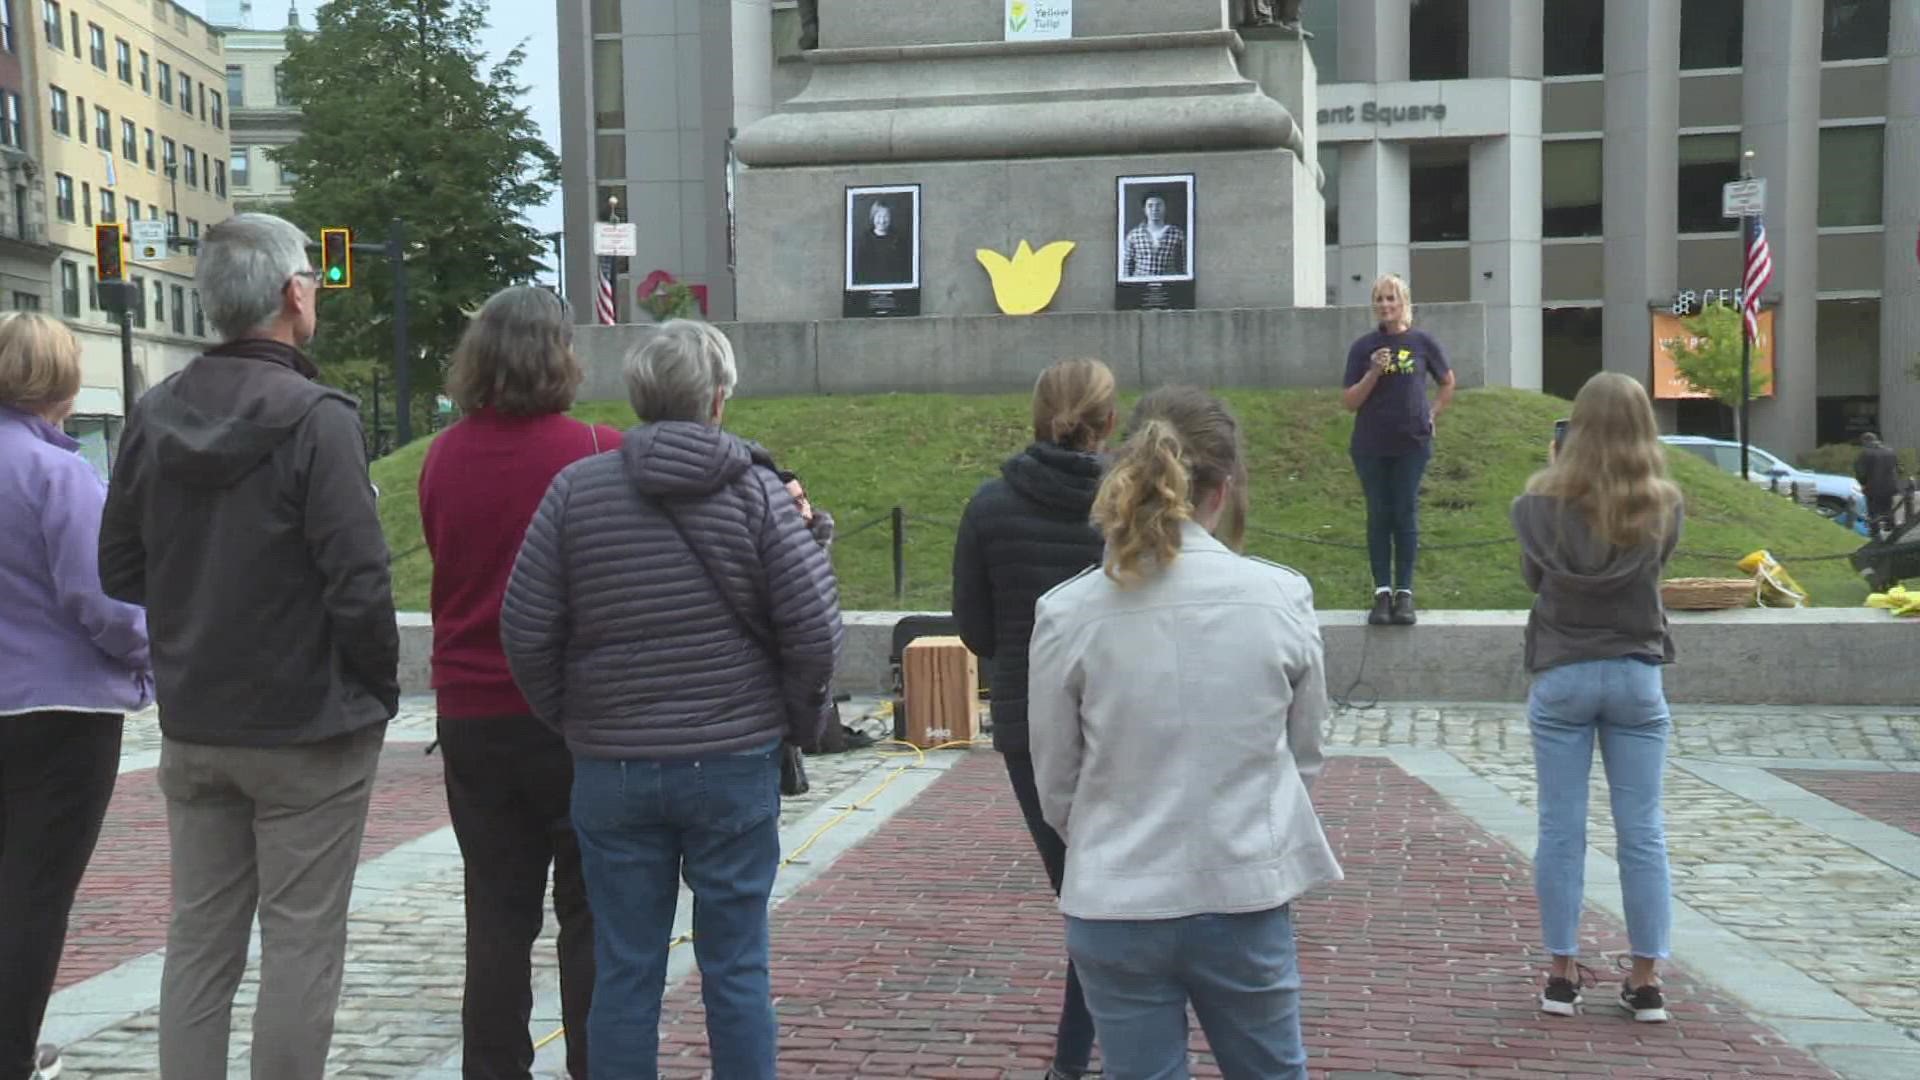 Dozens came to Monument Square in Portland Sunday as the youth-led non-profit ,the Yellow Tulip Project, worked to break the stigma surrounding mental health